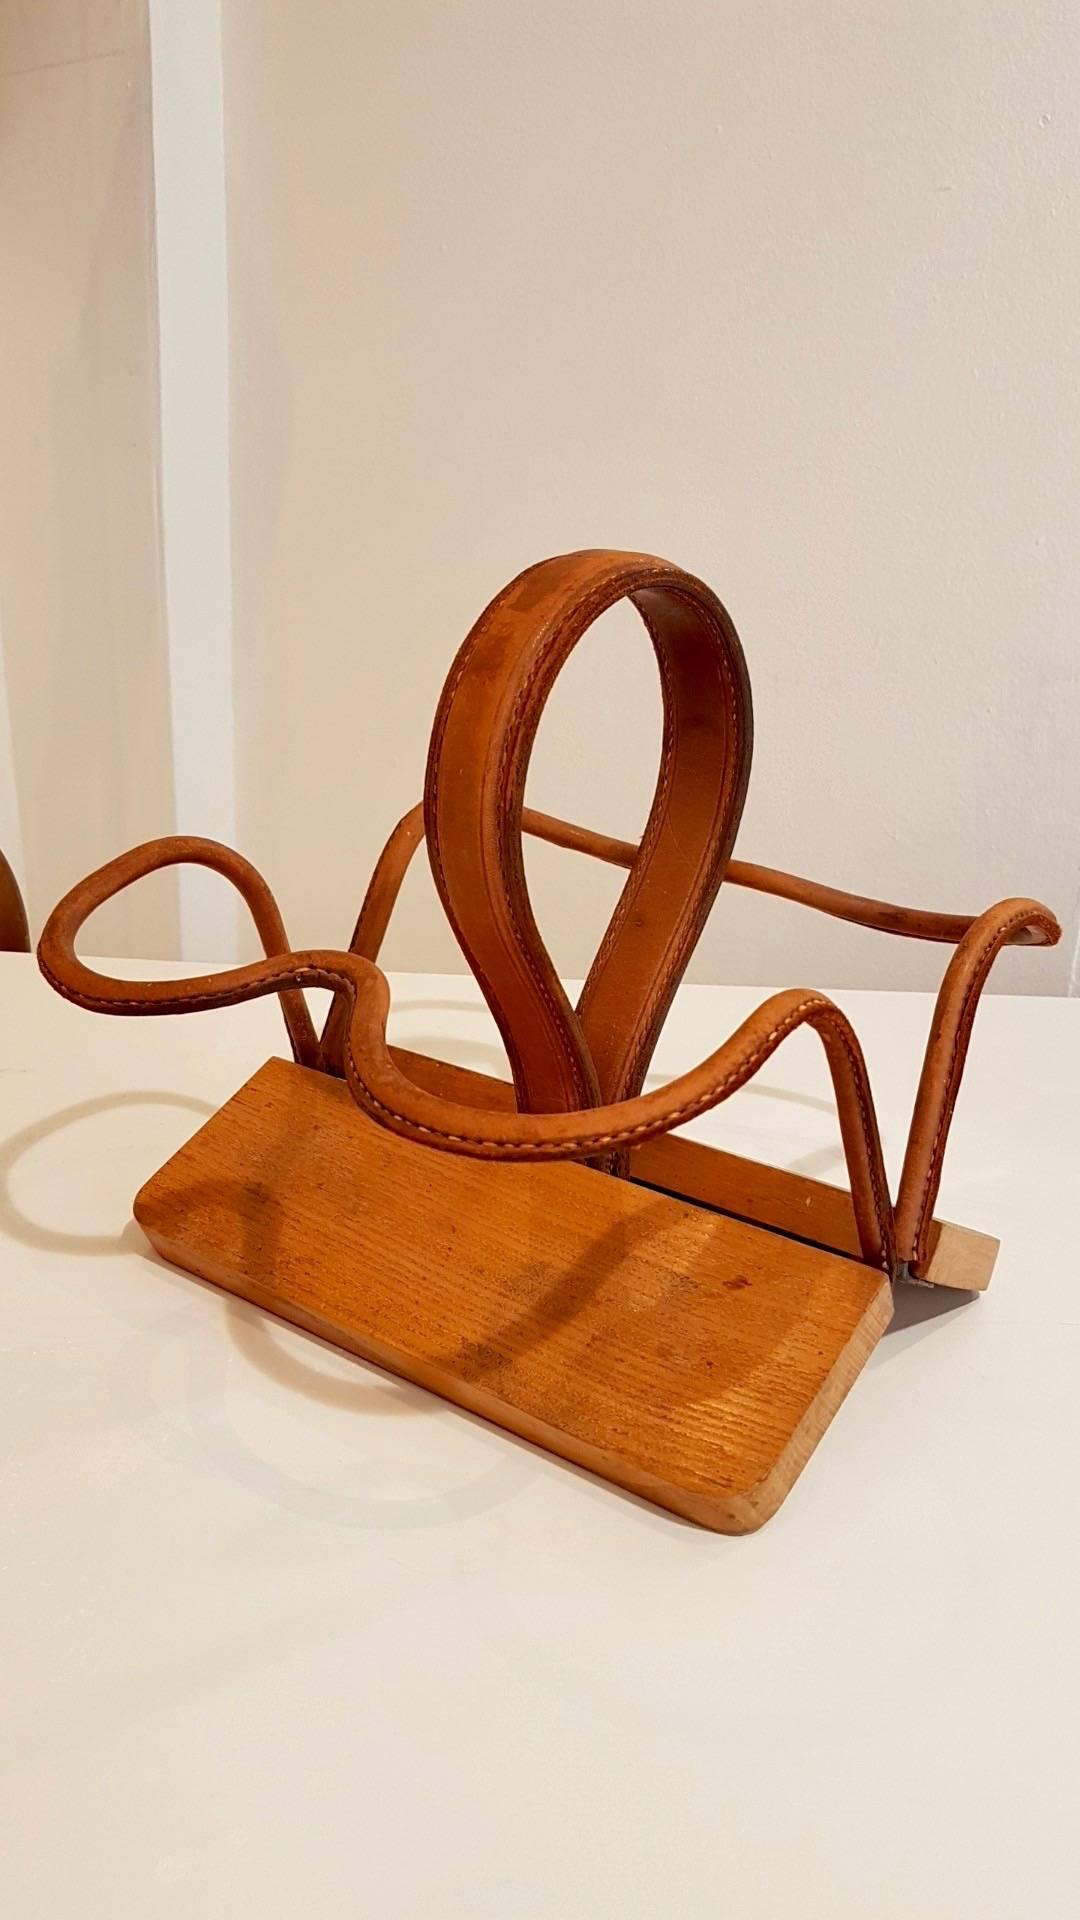 Handsome wine bottle holder by Jacques Adnet. Wood base with leather wrapped frame. Beautiful tabletop object. Excellent condition and patina to leather.